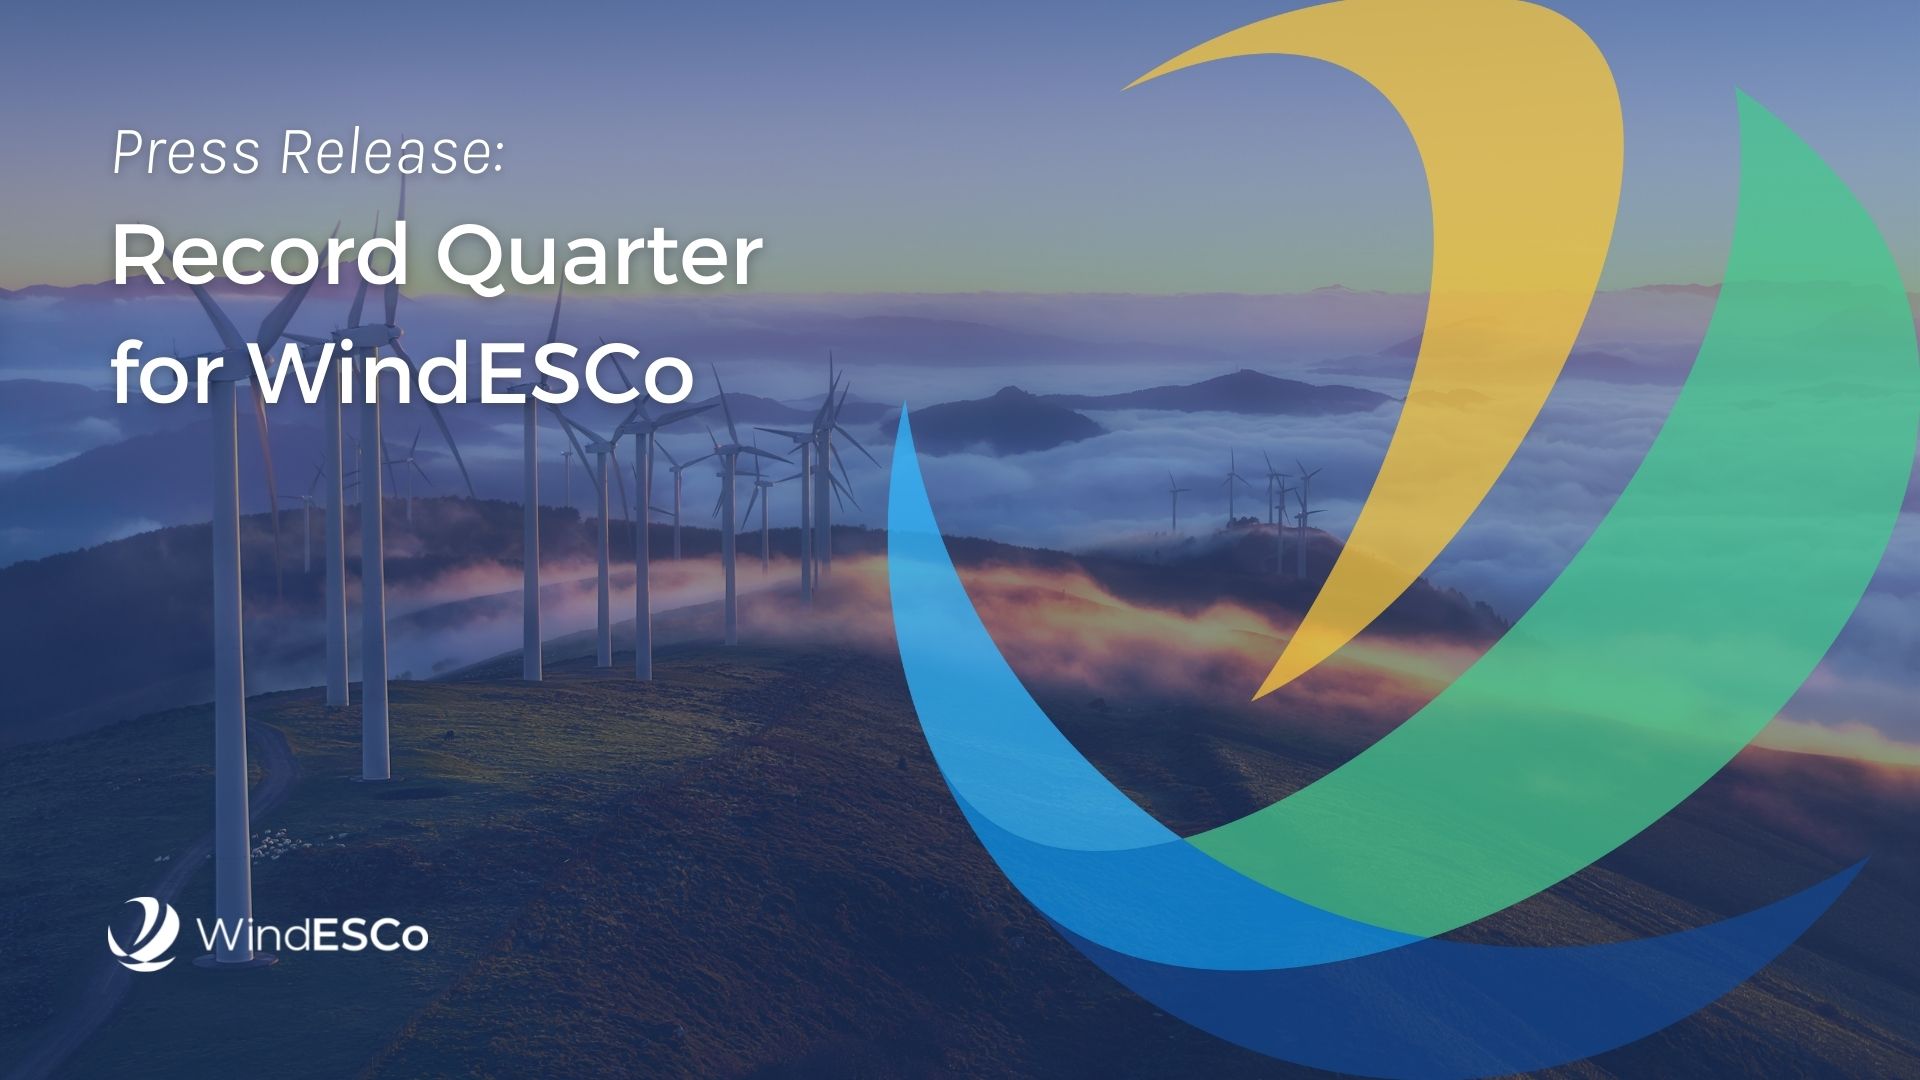 Press Release: WindESCo Sees Three-Fold Raise in Bookings